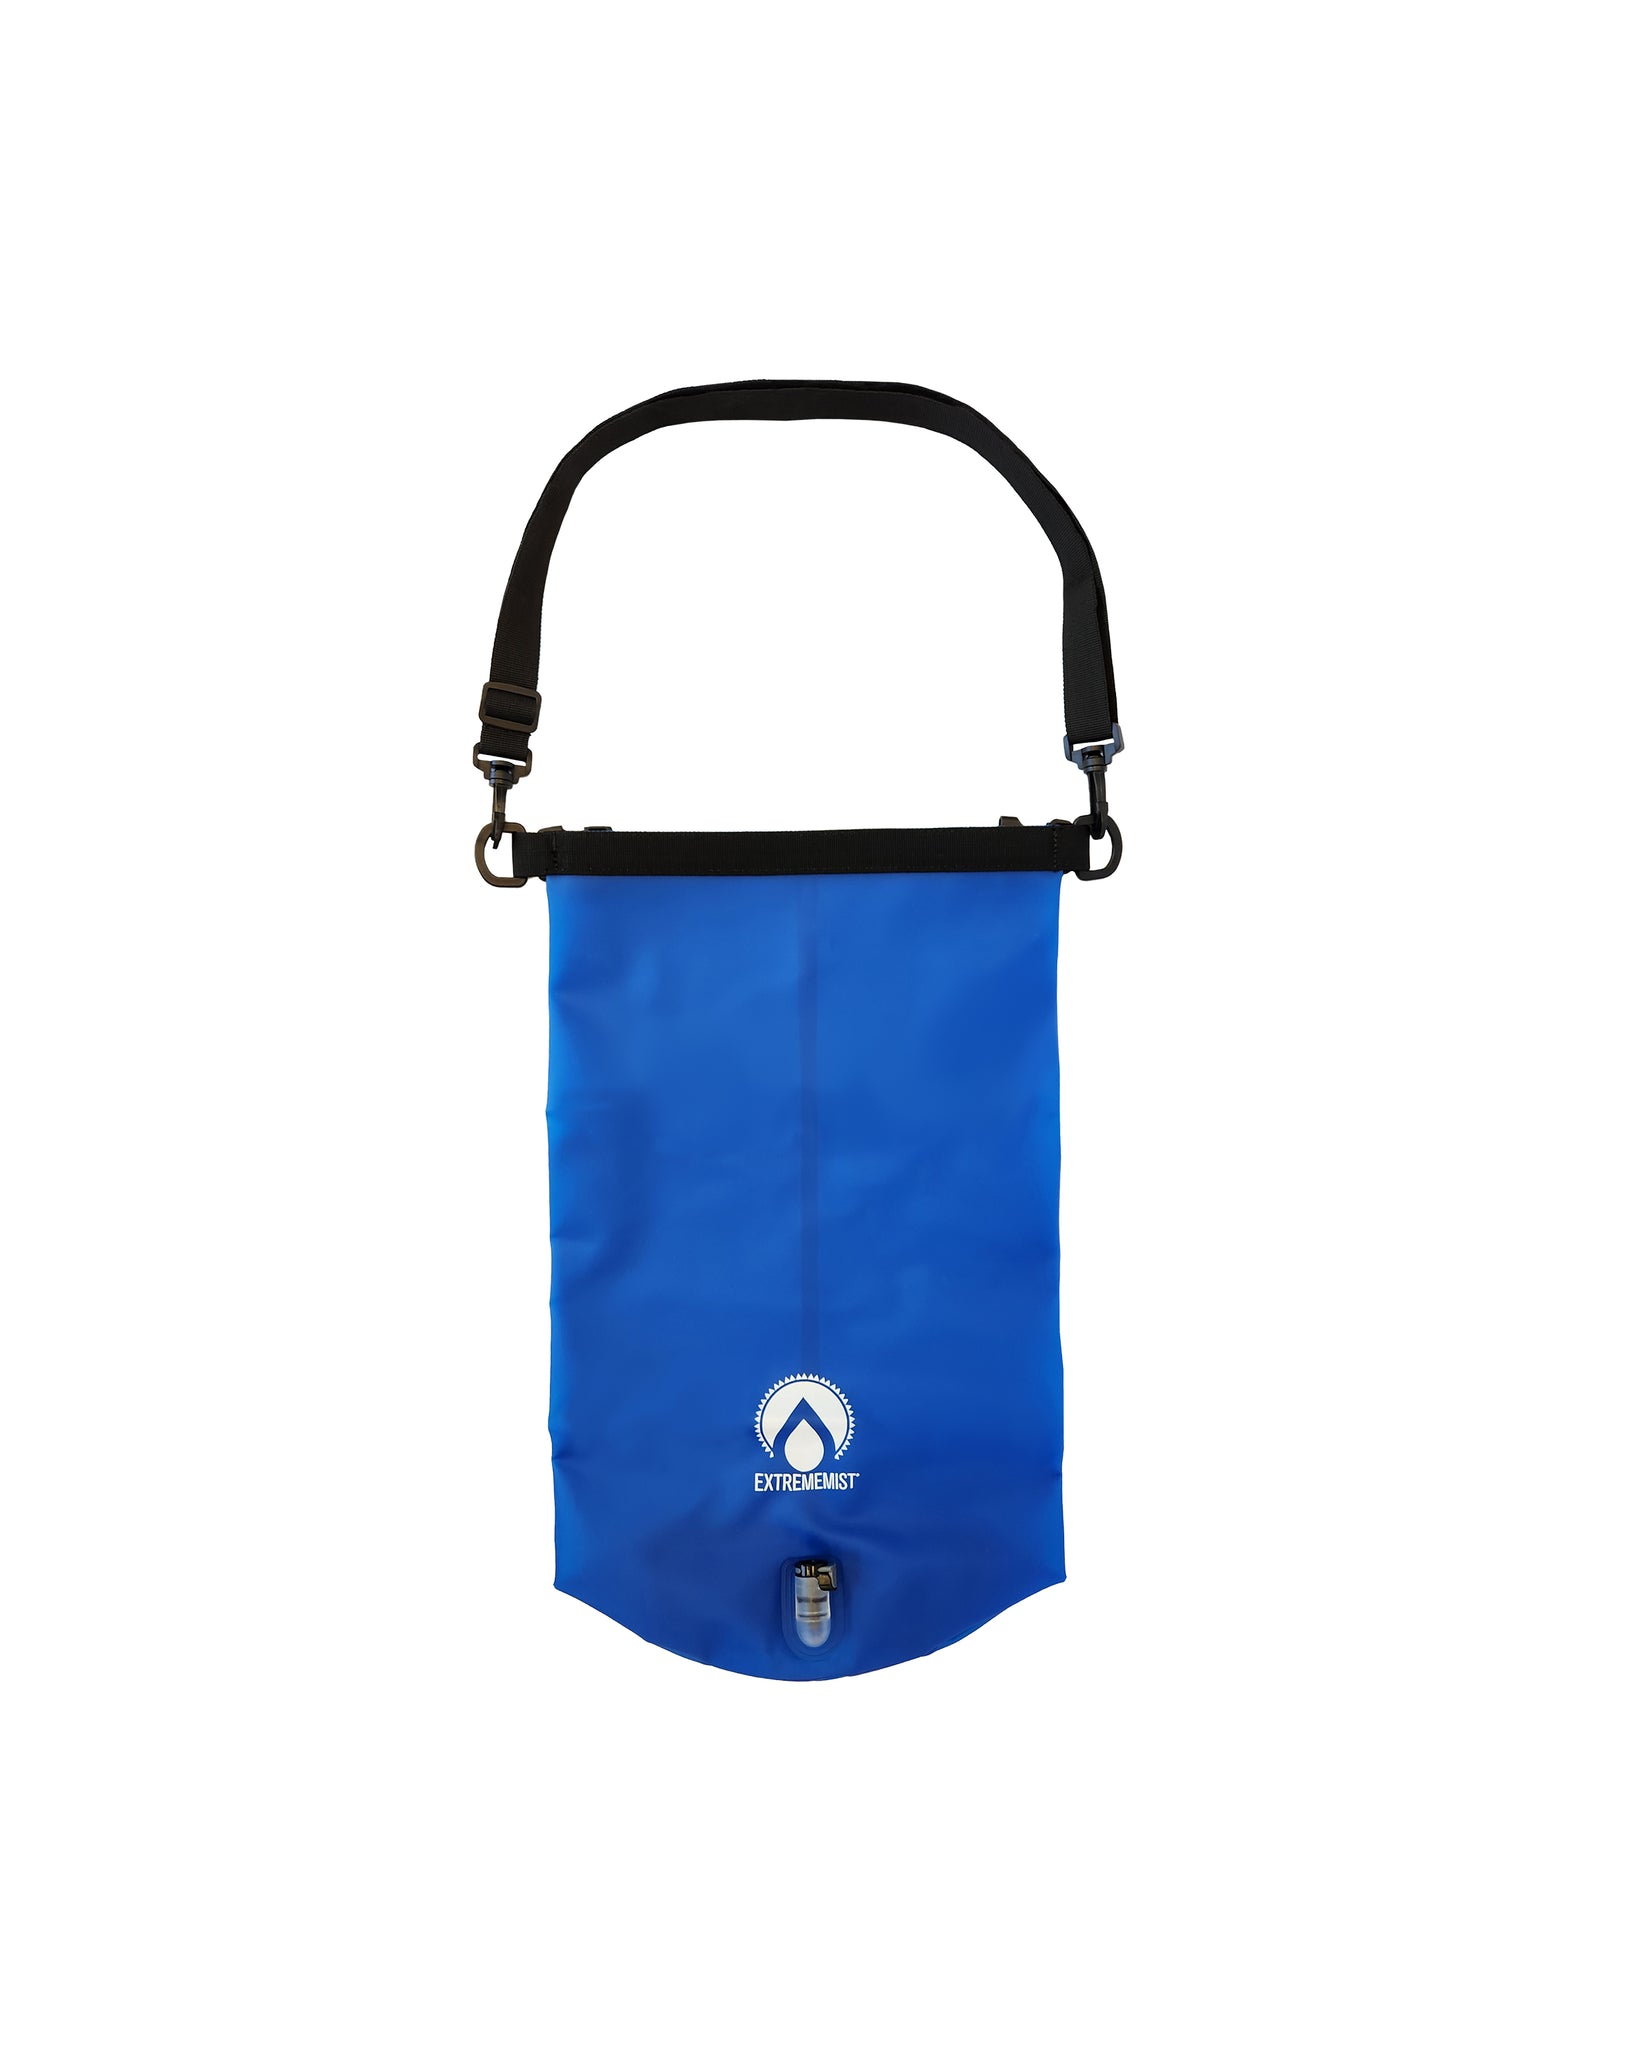 10 liter water bag container lying flat